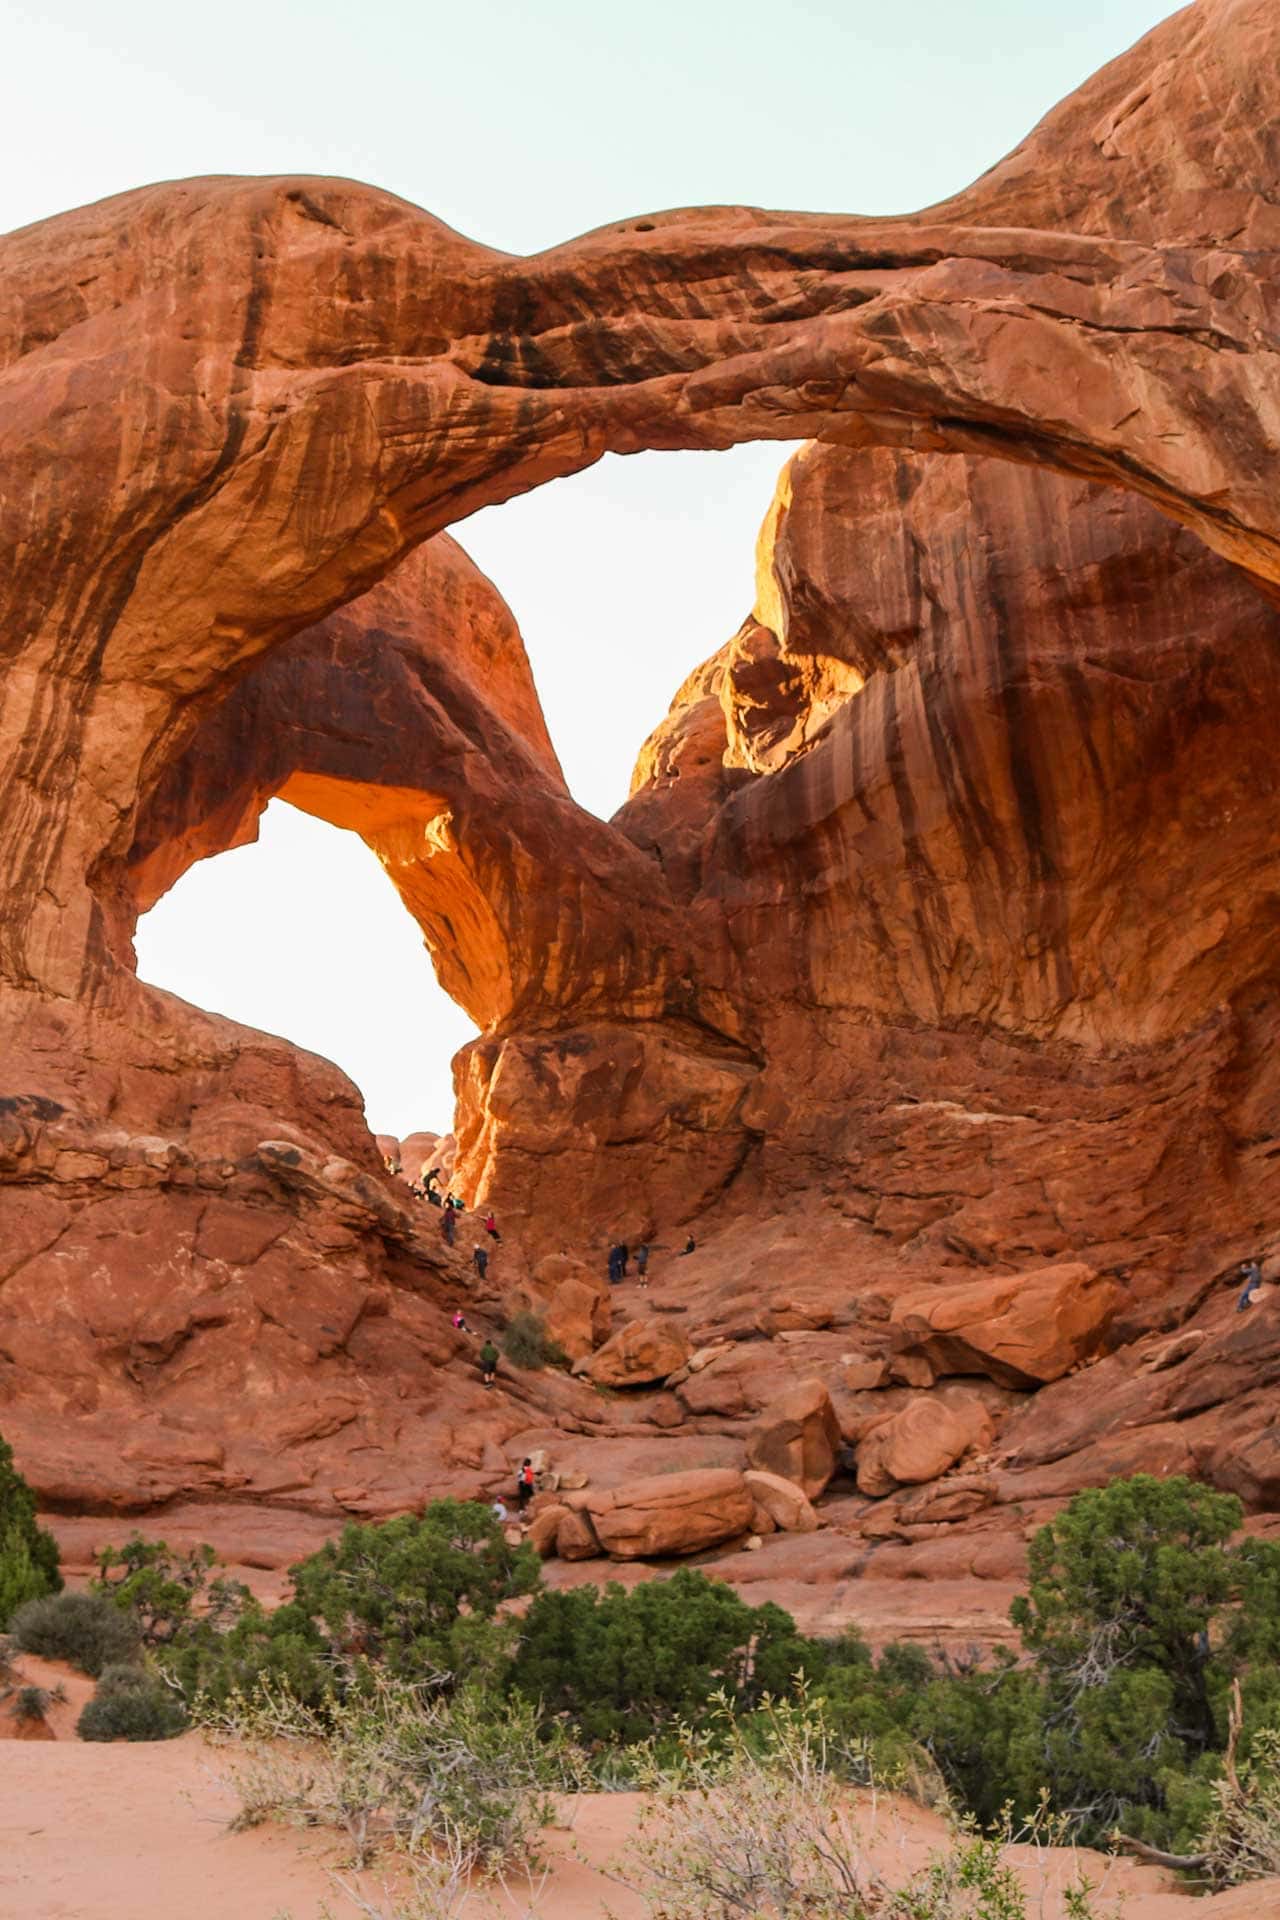 Fun facts about national parks: Arches National Park comprises the most natural rock arches in the world.